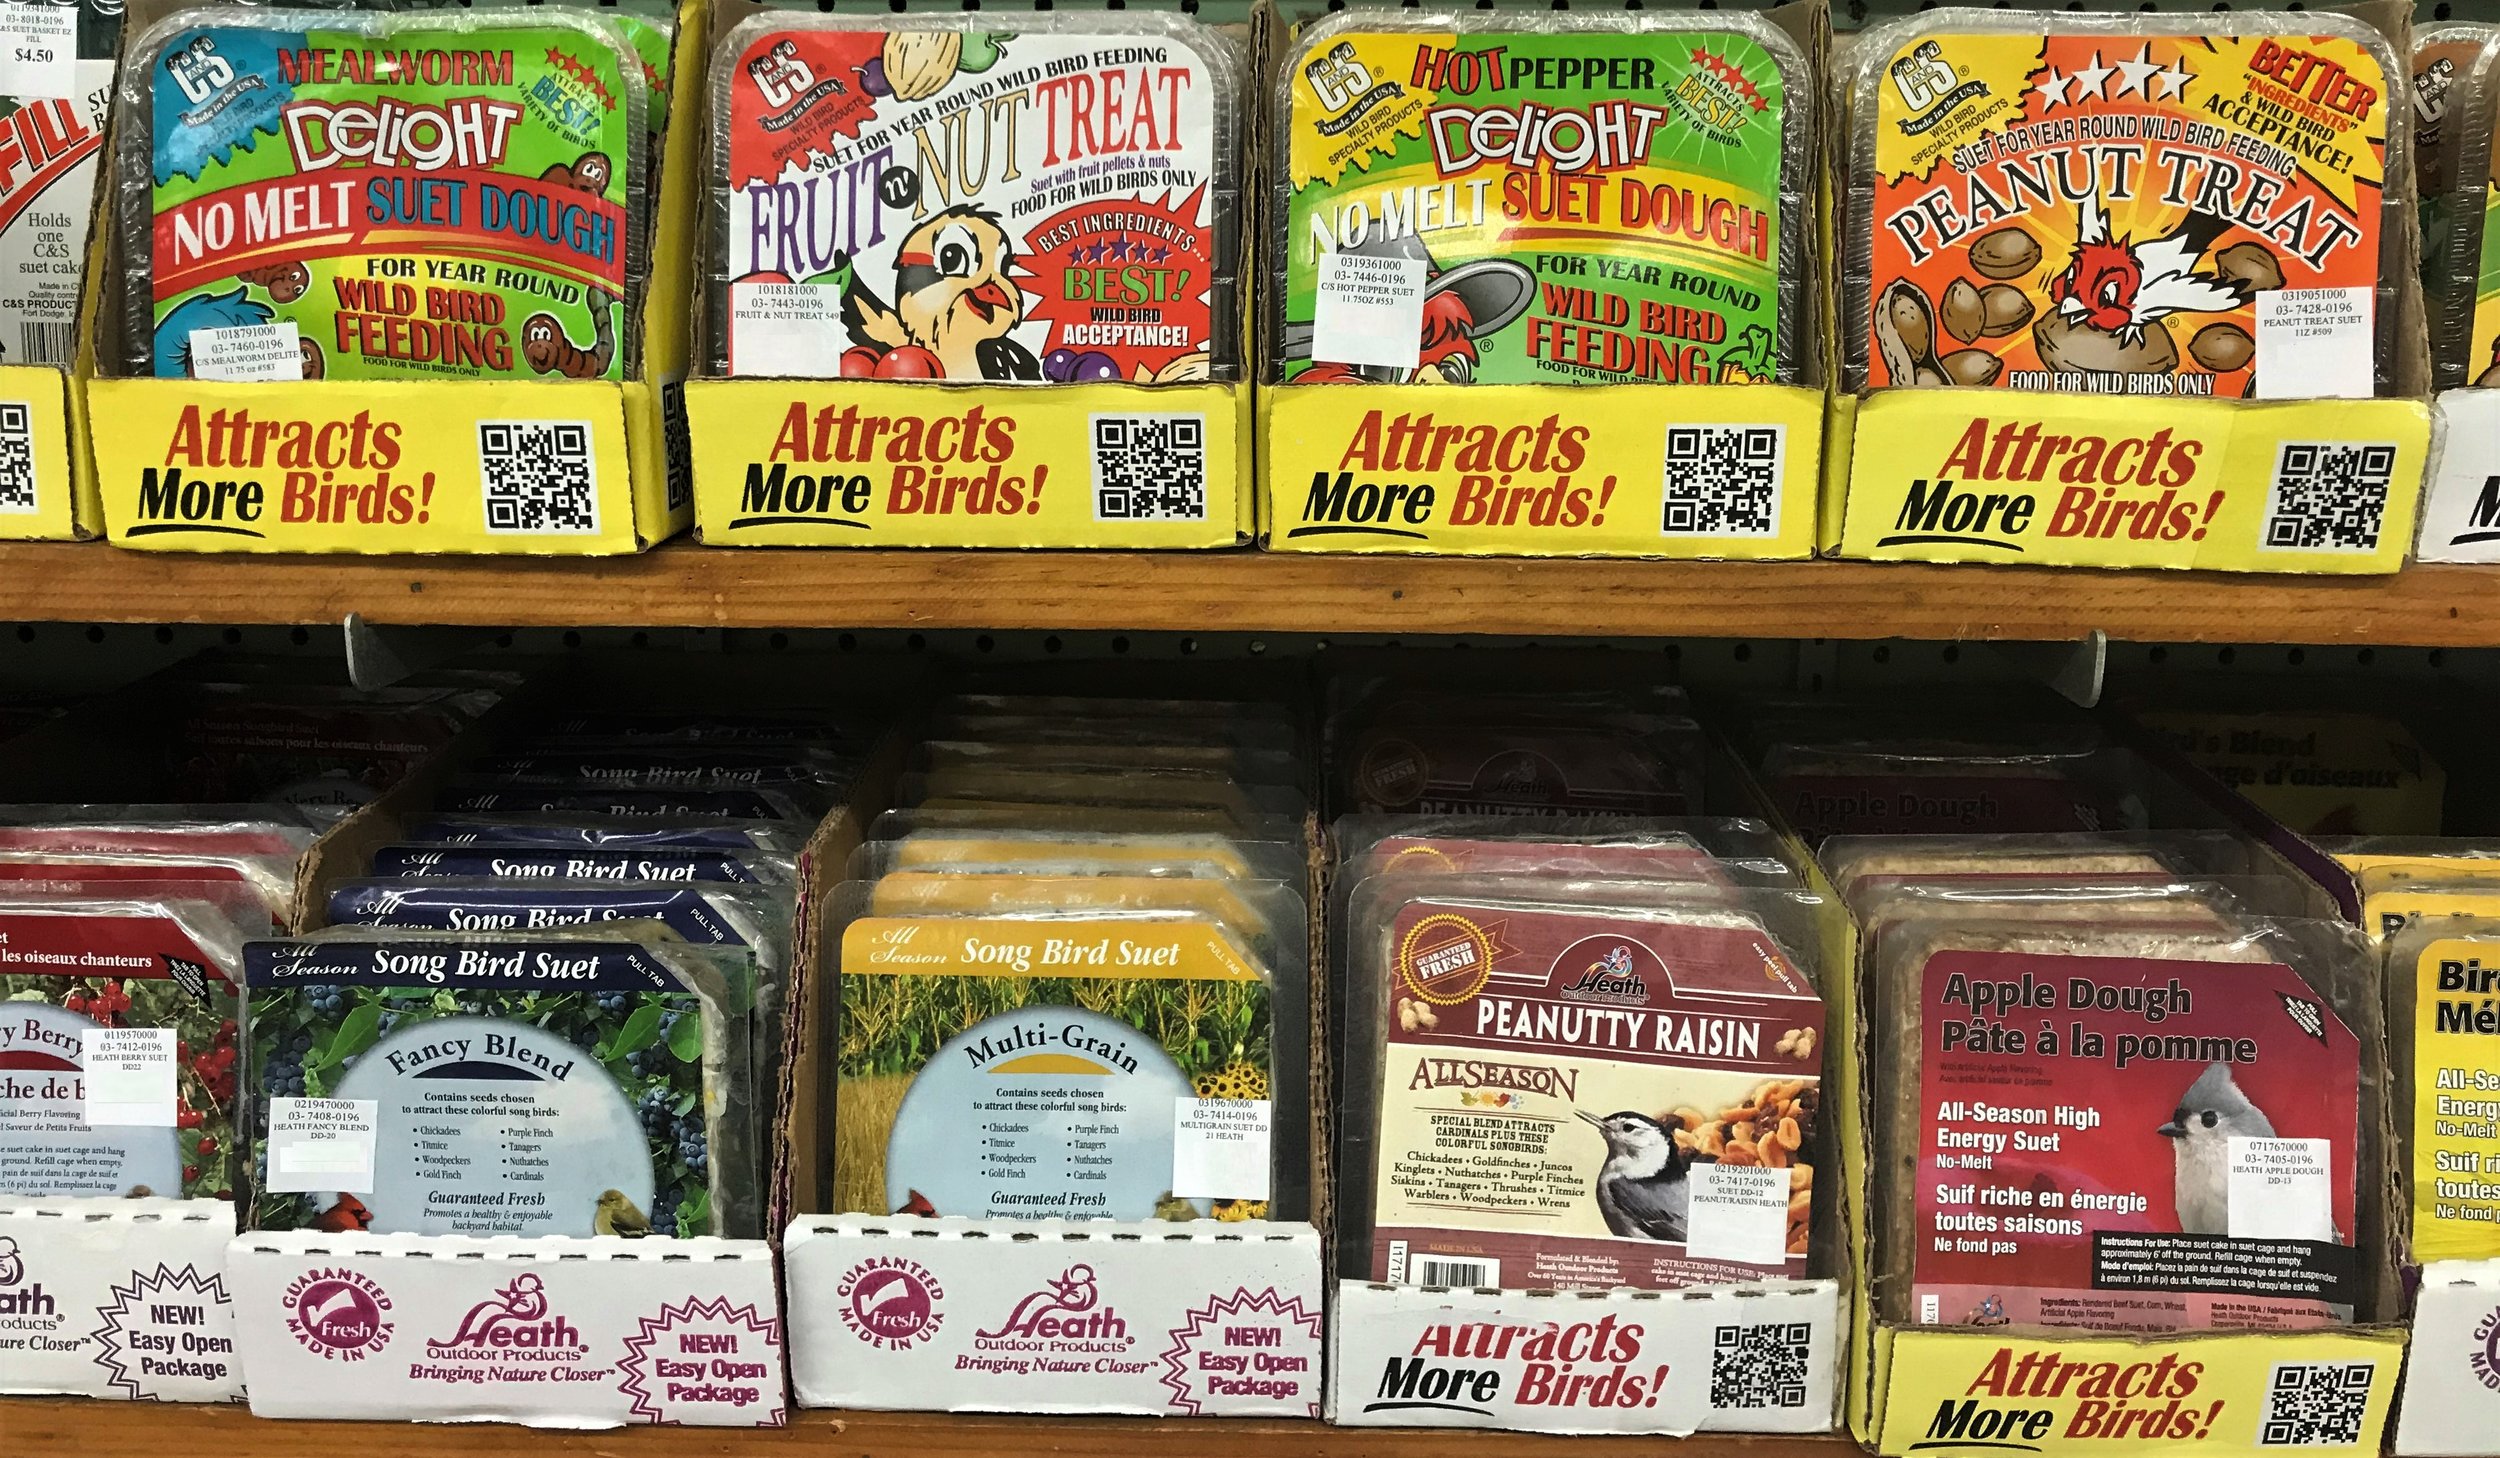  We also carry C&amp;S suet and Pine Tree Farms Suet! 